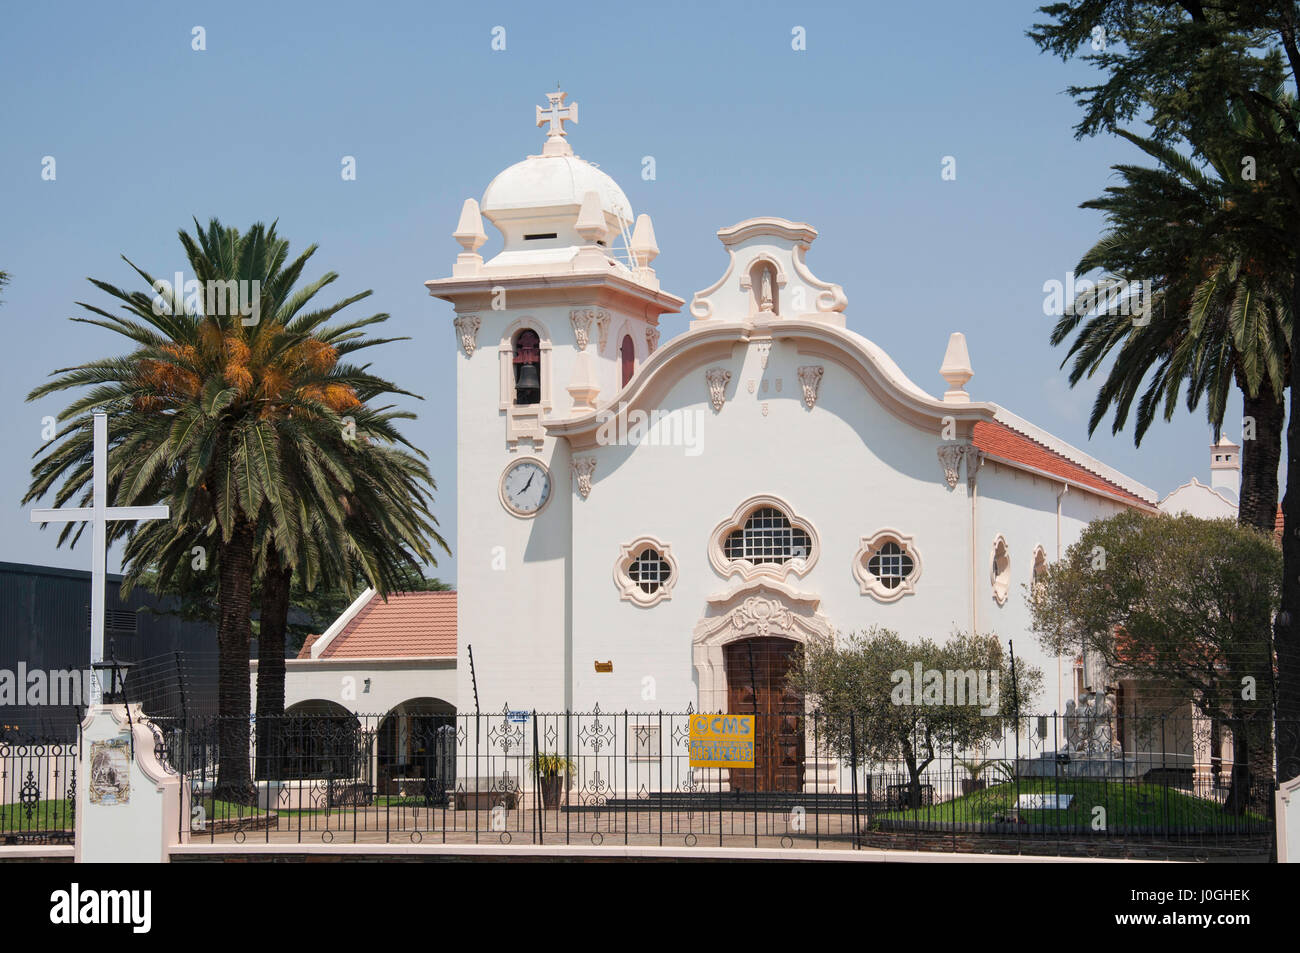 Our Lady of Fatima Portuguese Church, Great North Rd, Brentwood Park, Benoni, East Rand, Gauteng Province, Republic of South Africa Stock Photo